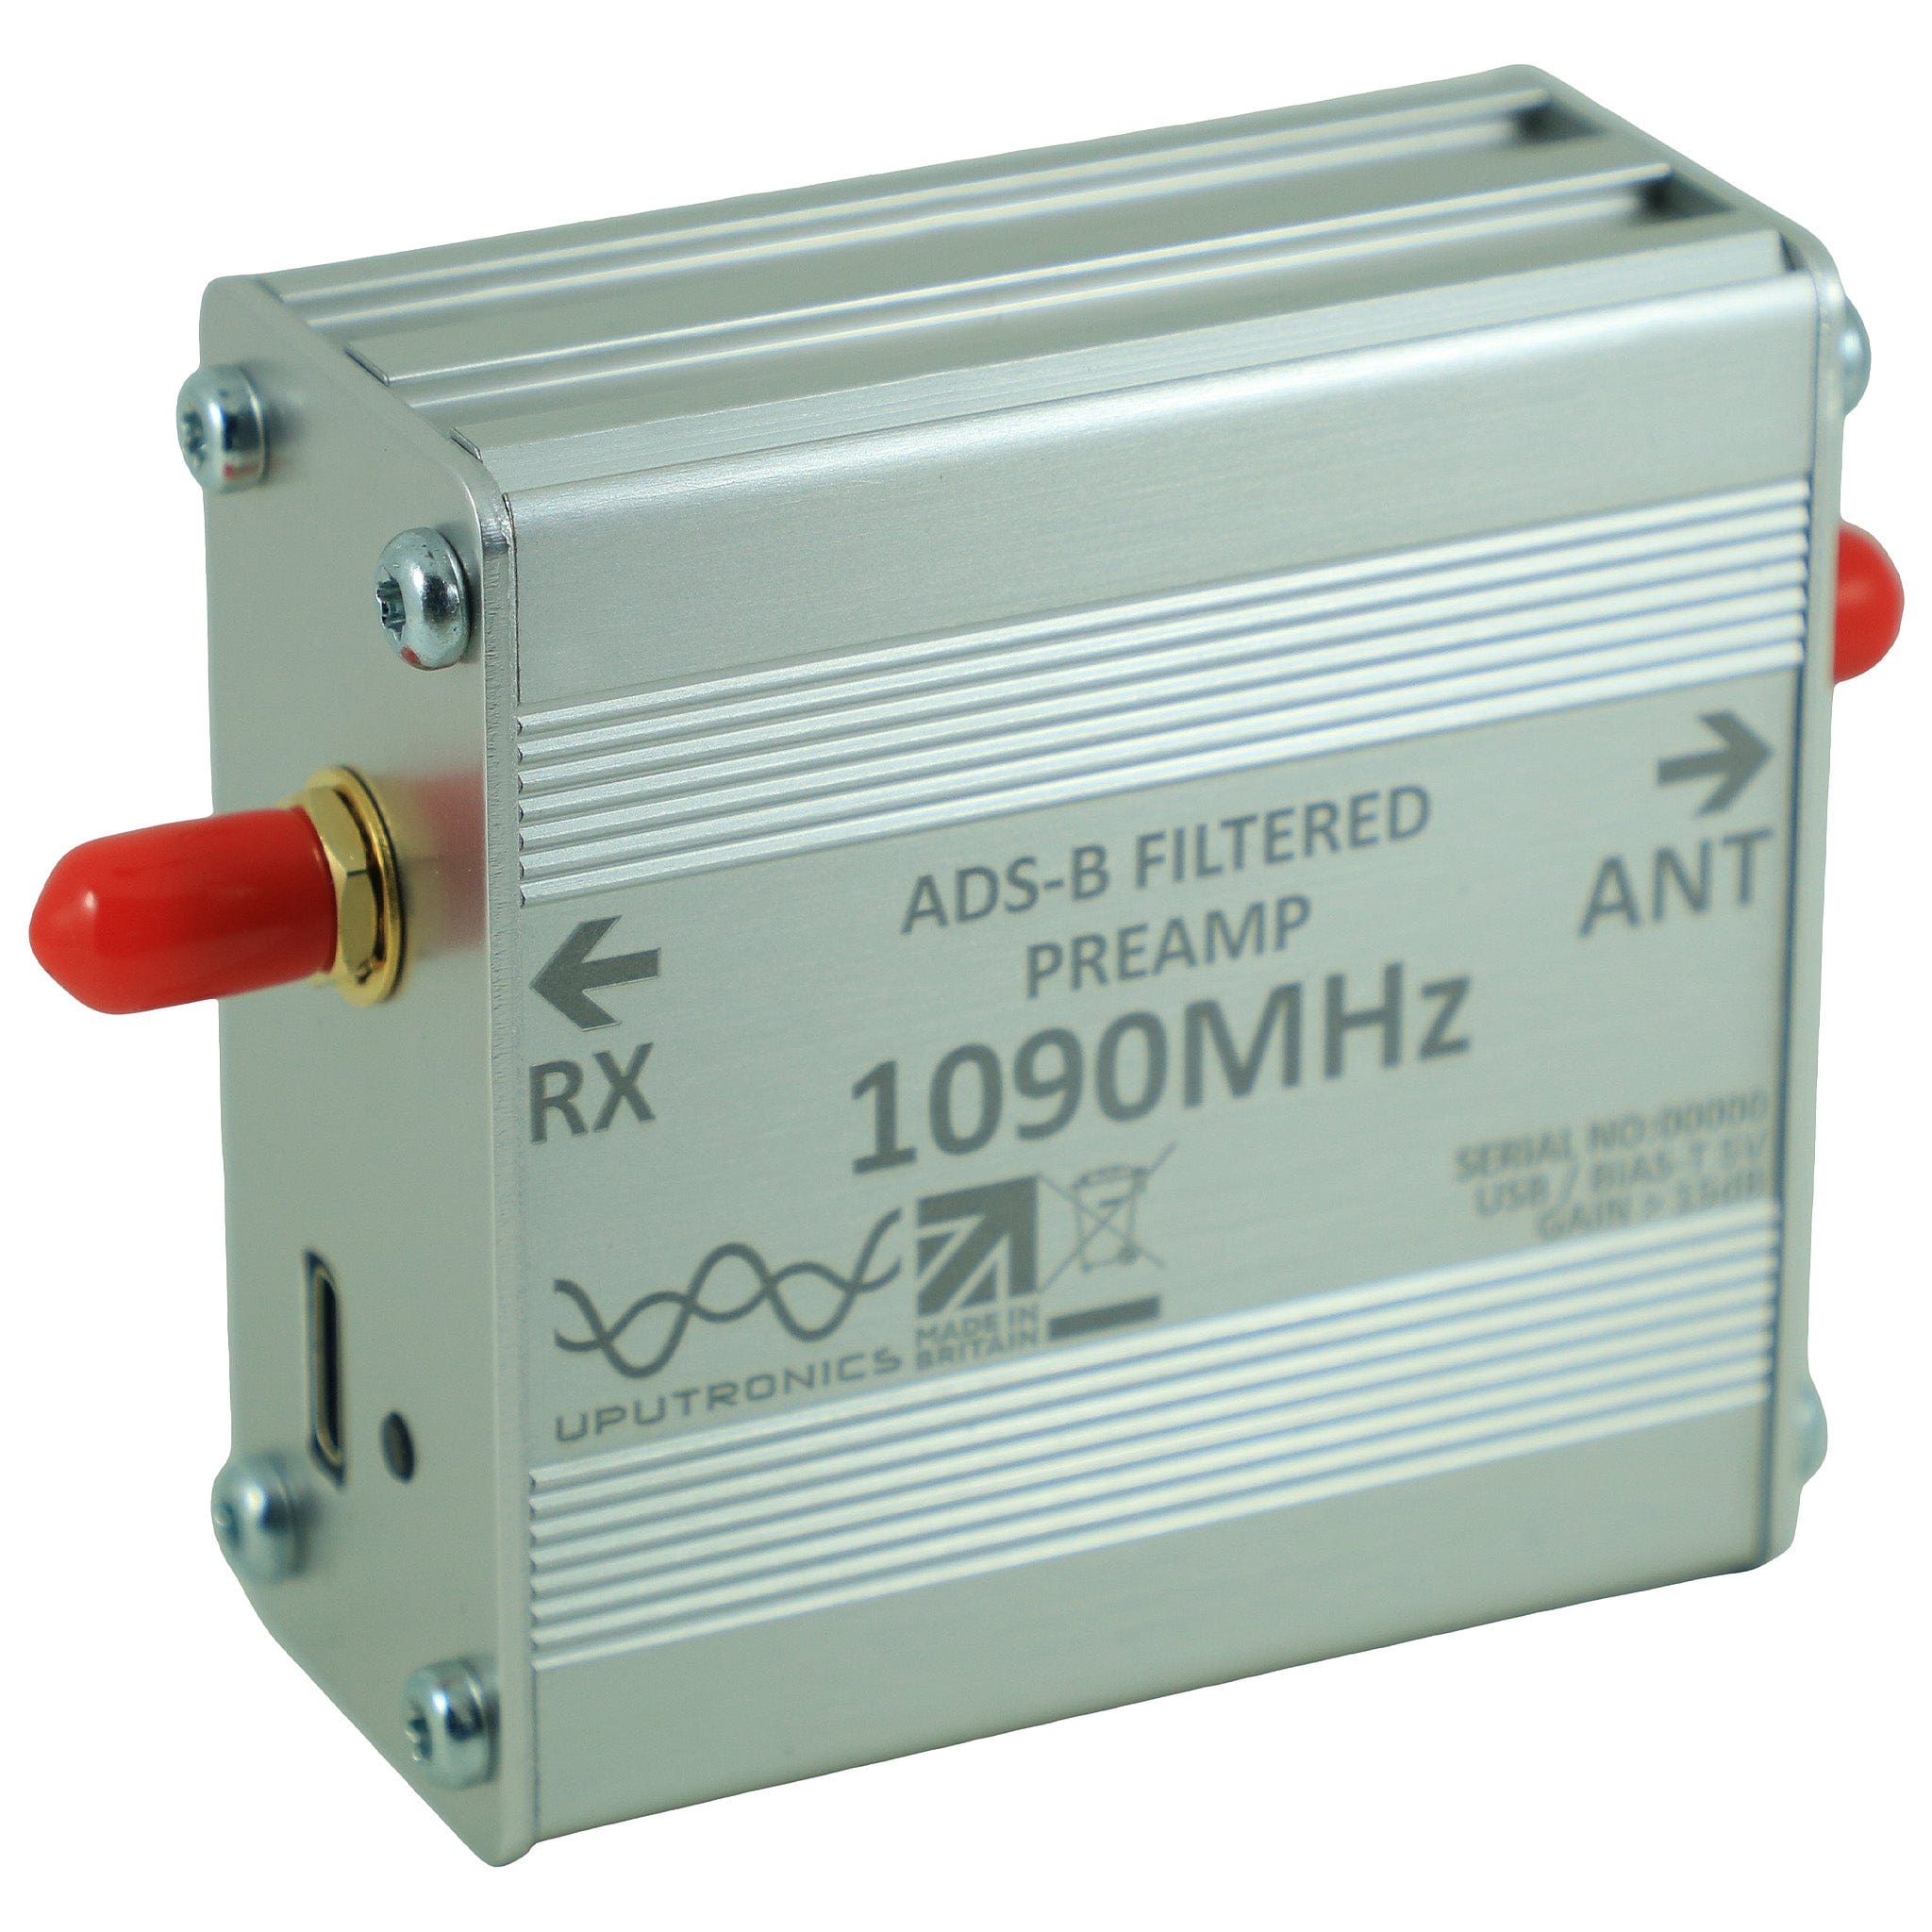 ADS-B 1090MHz Filtered Preamplifier - The Pi Hut